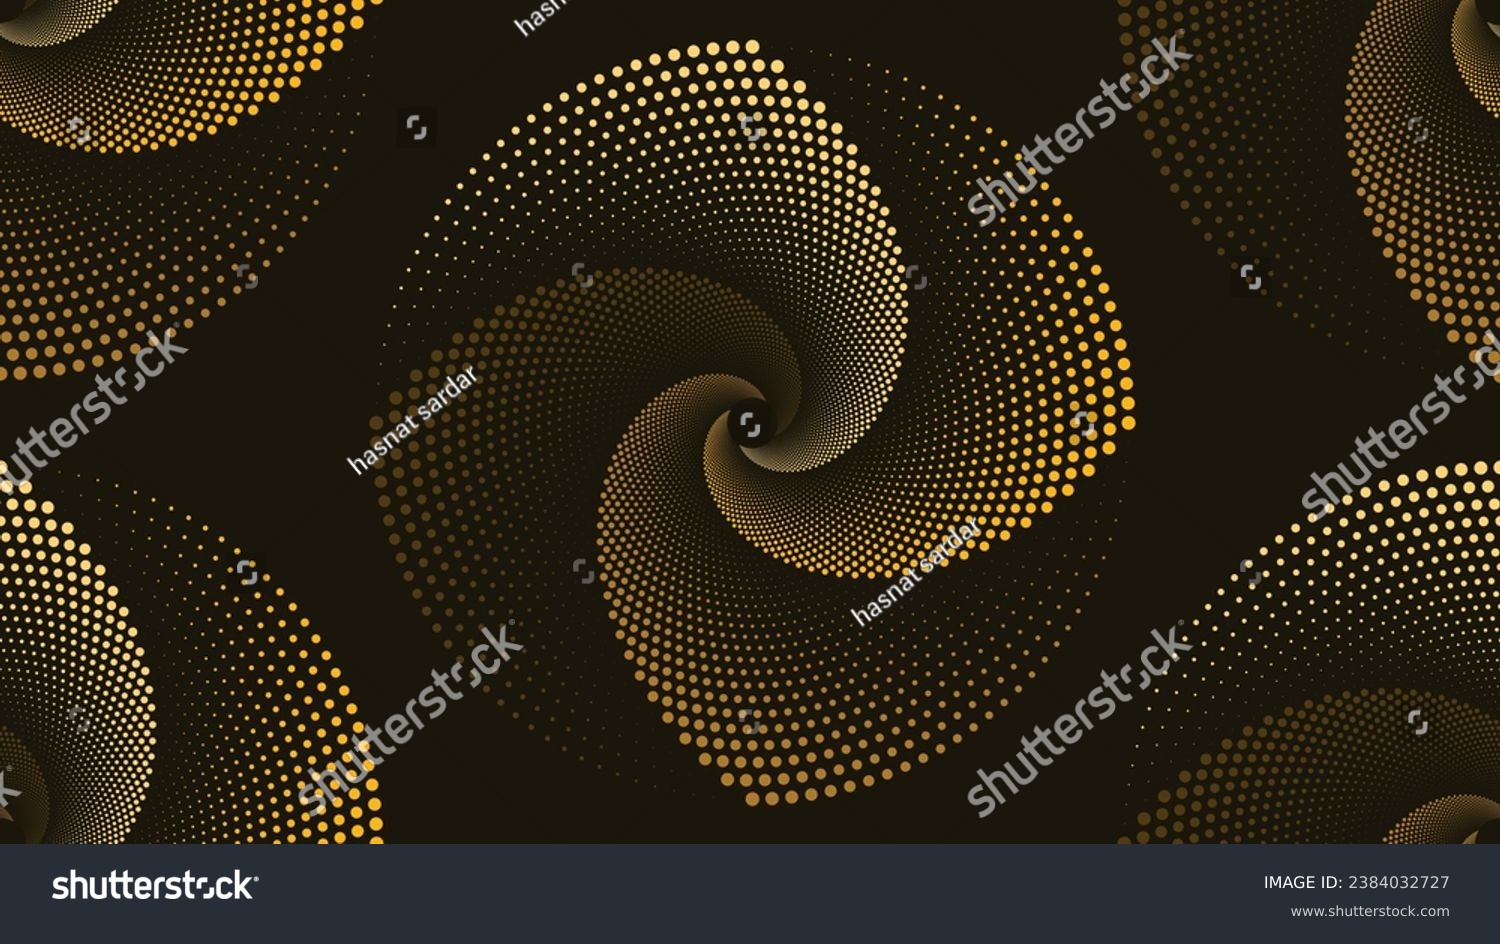 Abstract spiral round logotype flower background in dark color. This minimalist style dotted spiral Mandala will make your project more meaningful. #2384032727